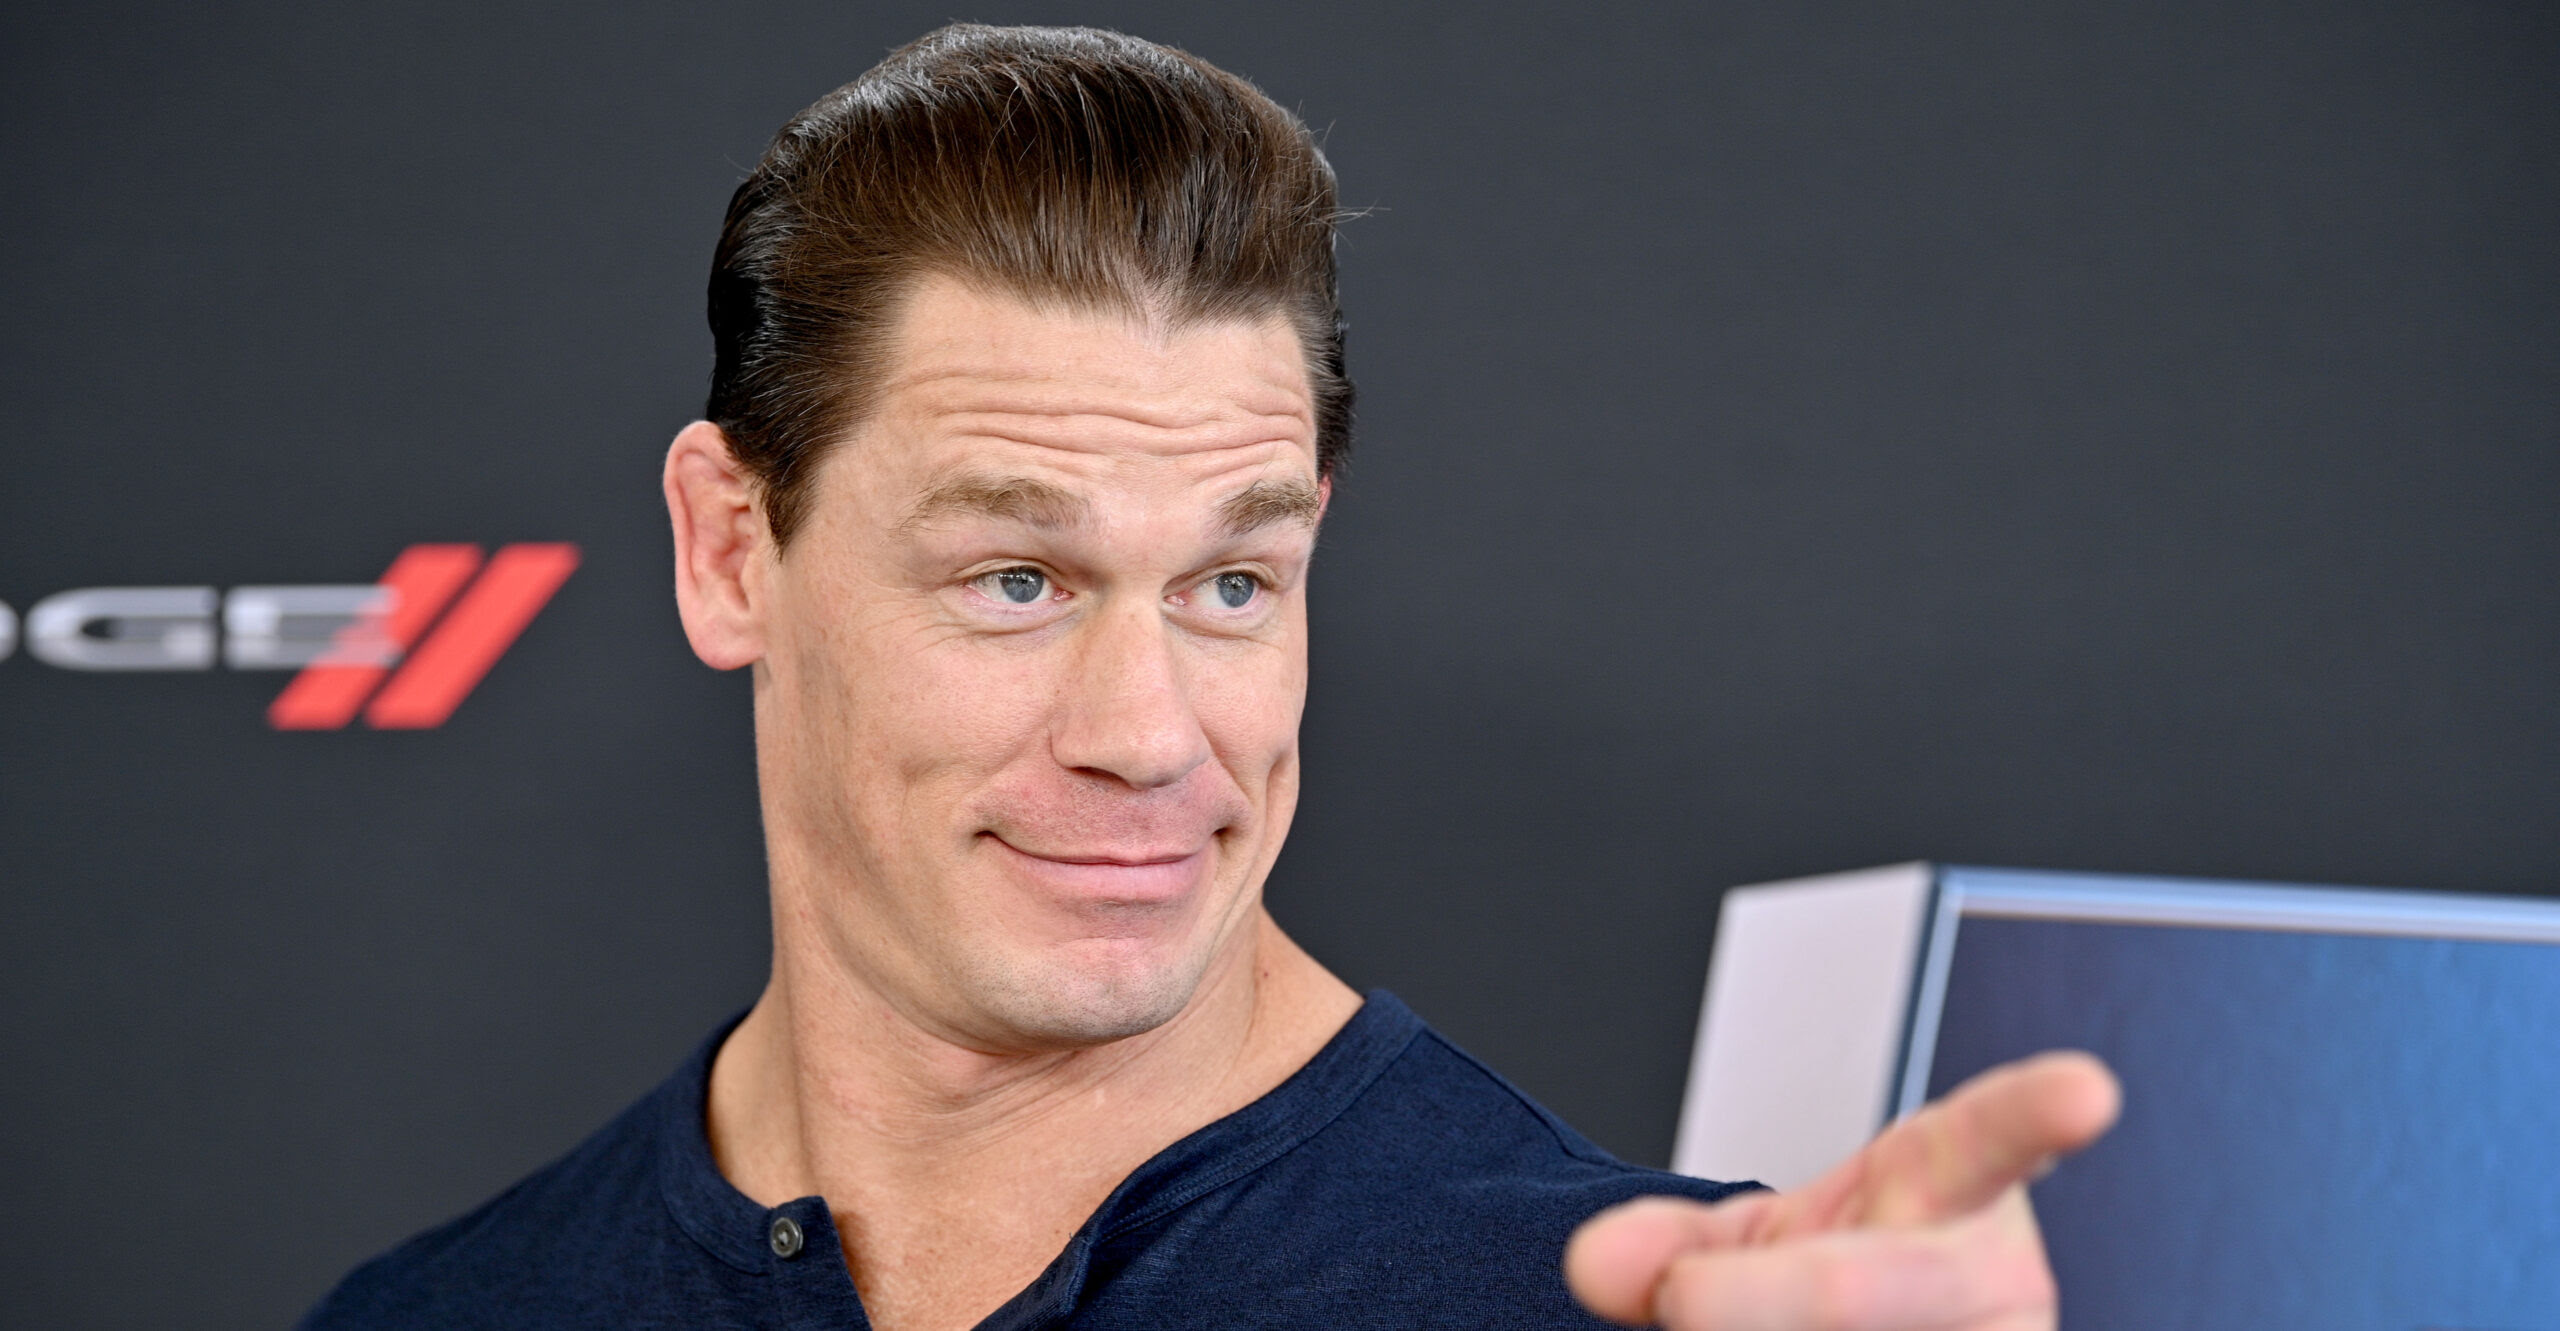 John Cena’s Groveling to China Previews World Where We Must Live by Lies